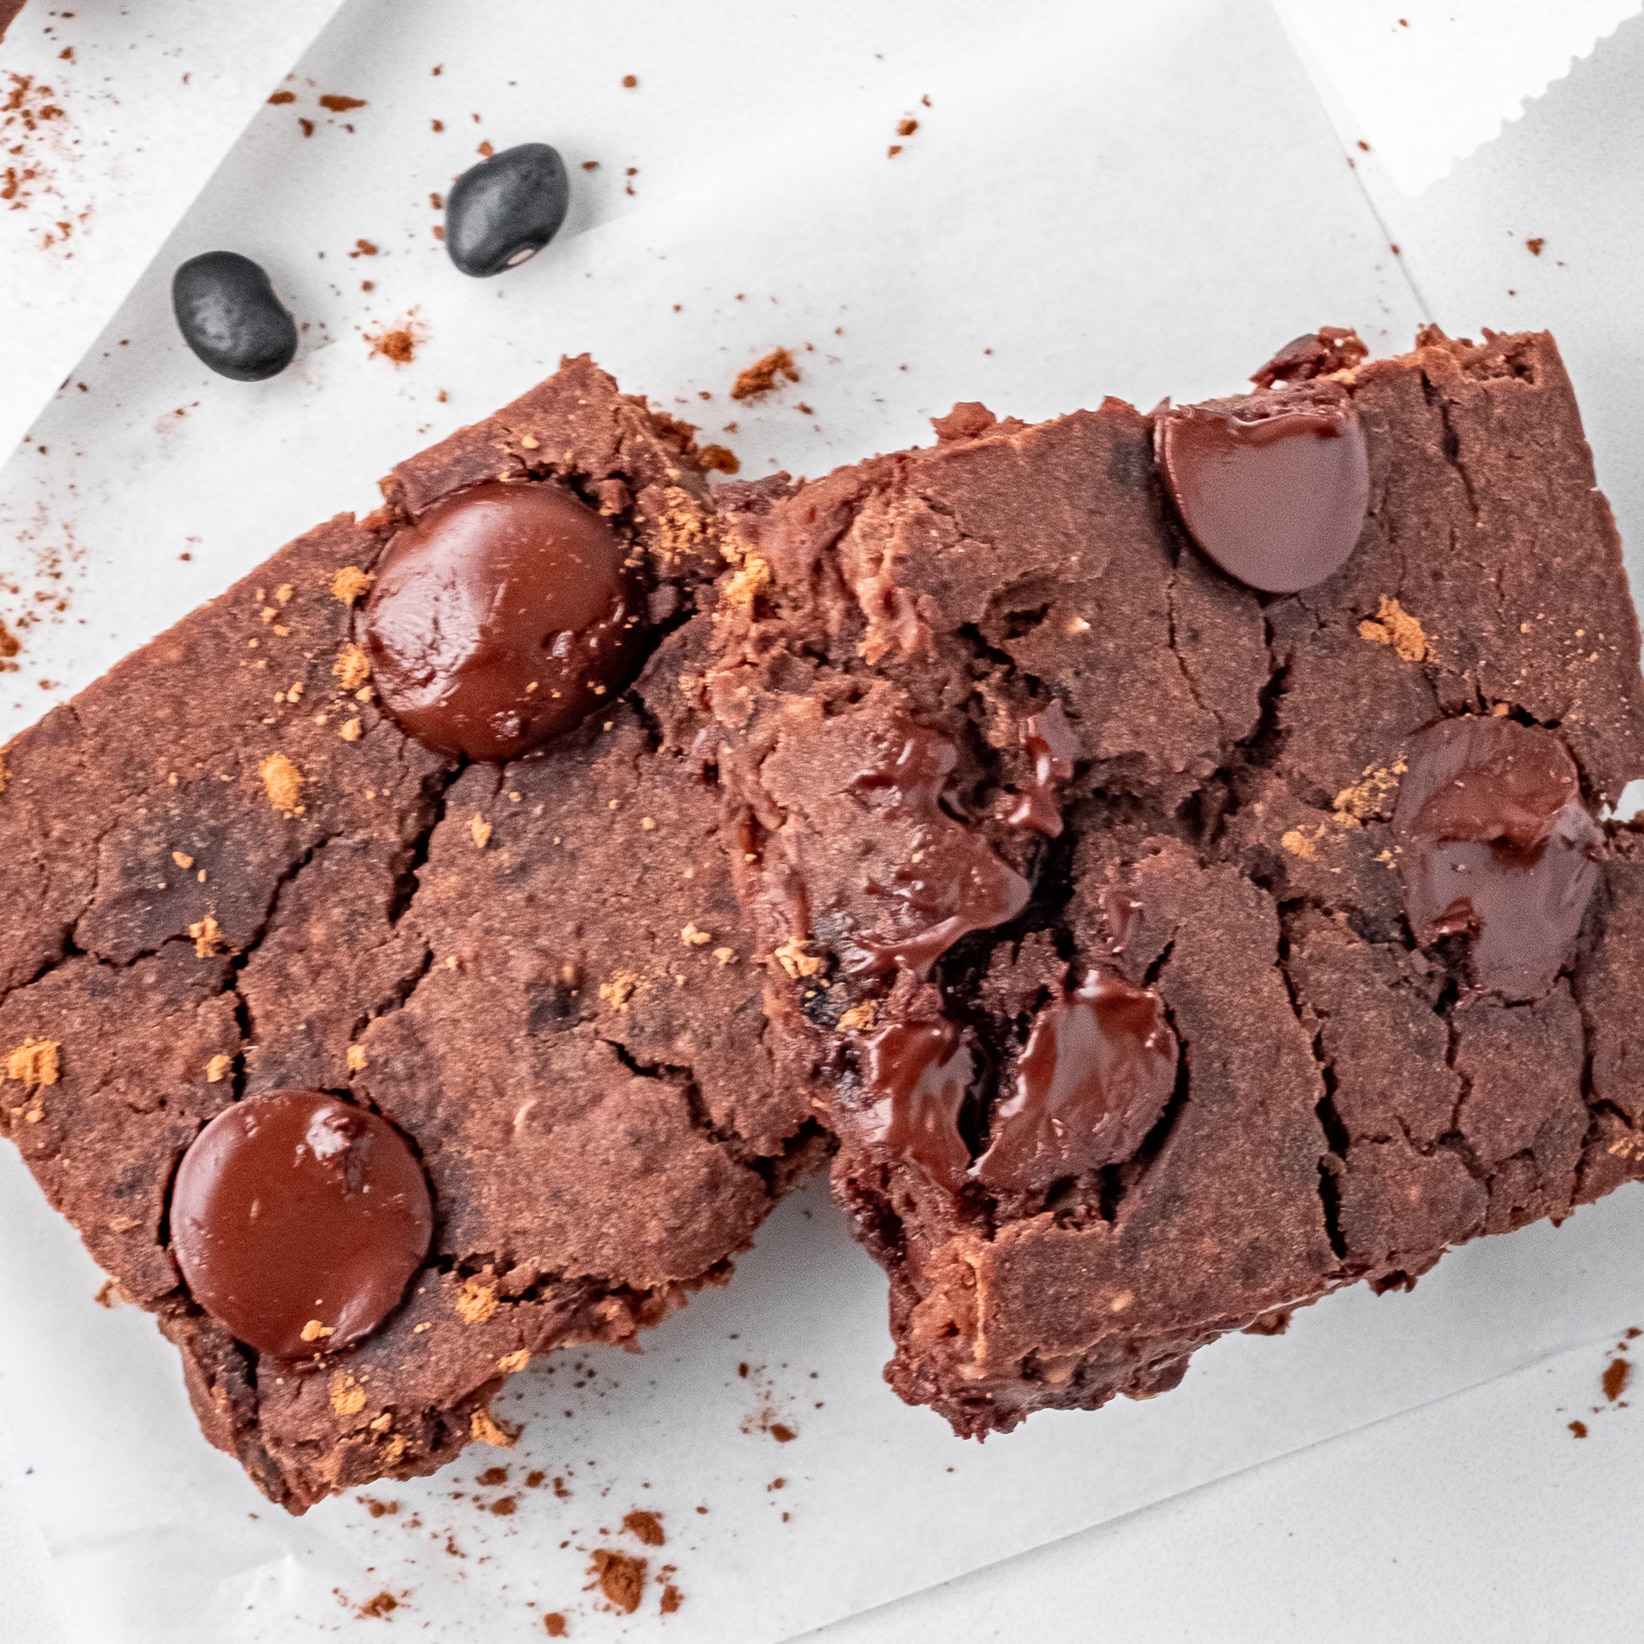 Top view photo of two black bean brownies, on a white plate, ready to enjoy.